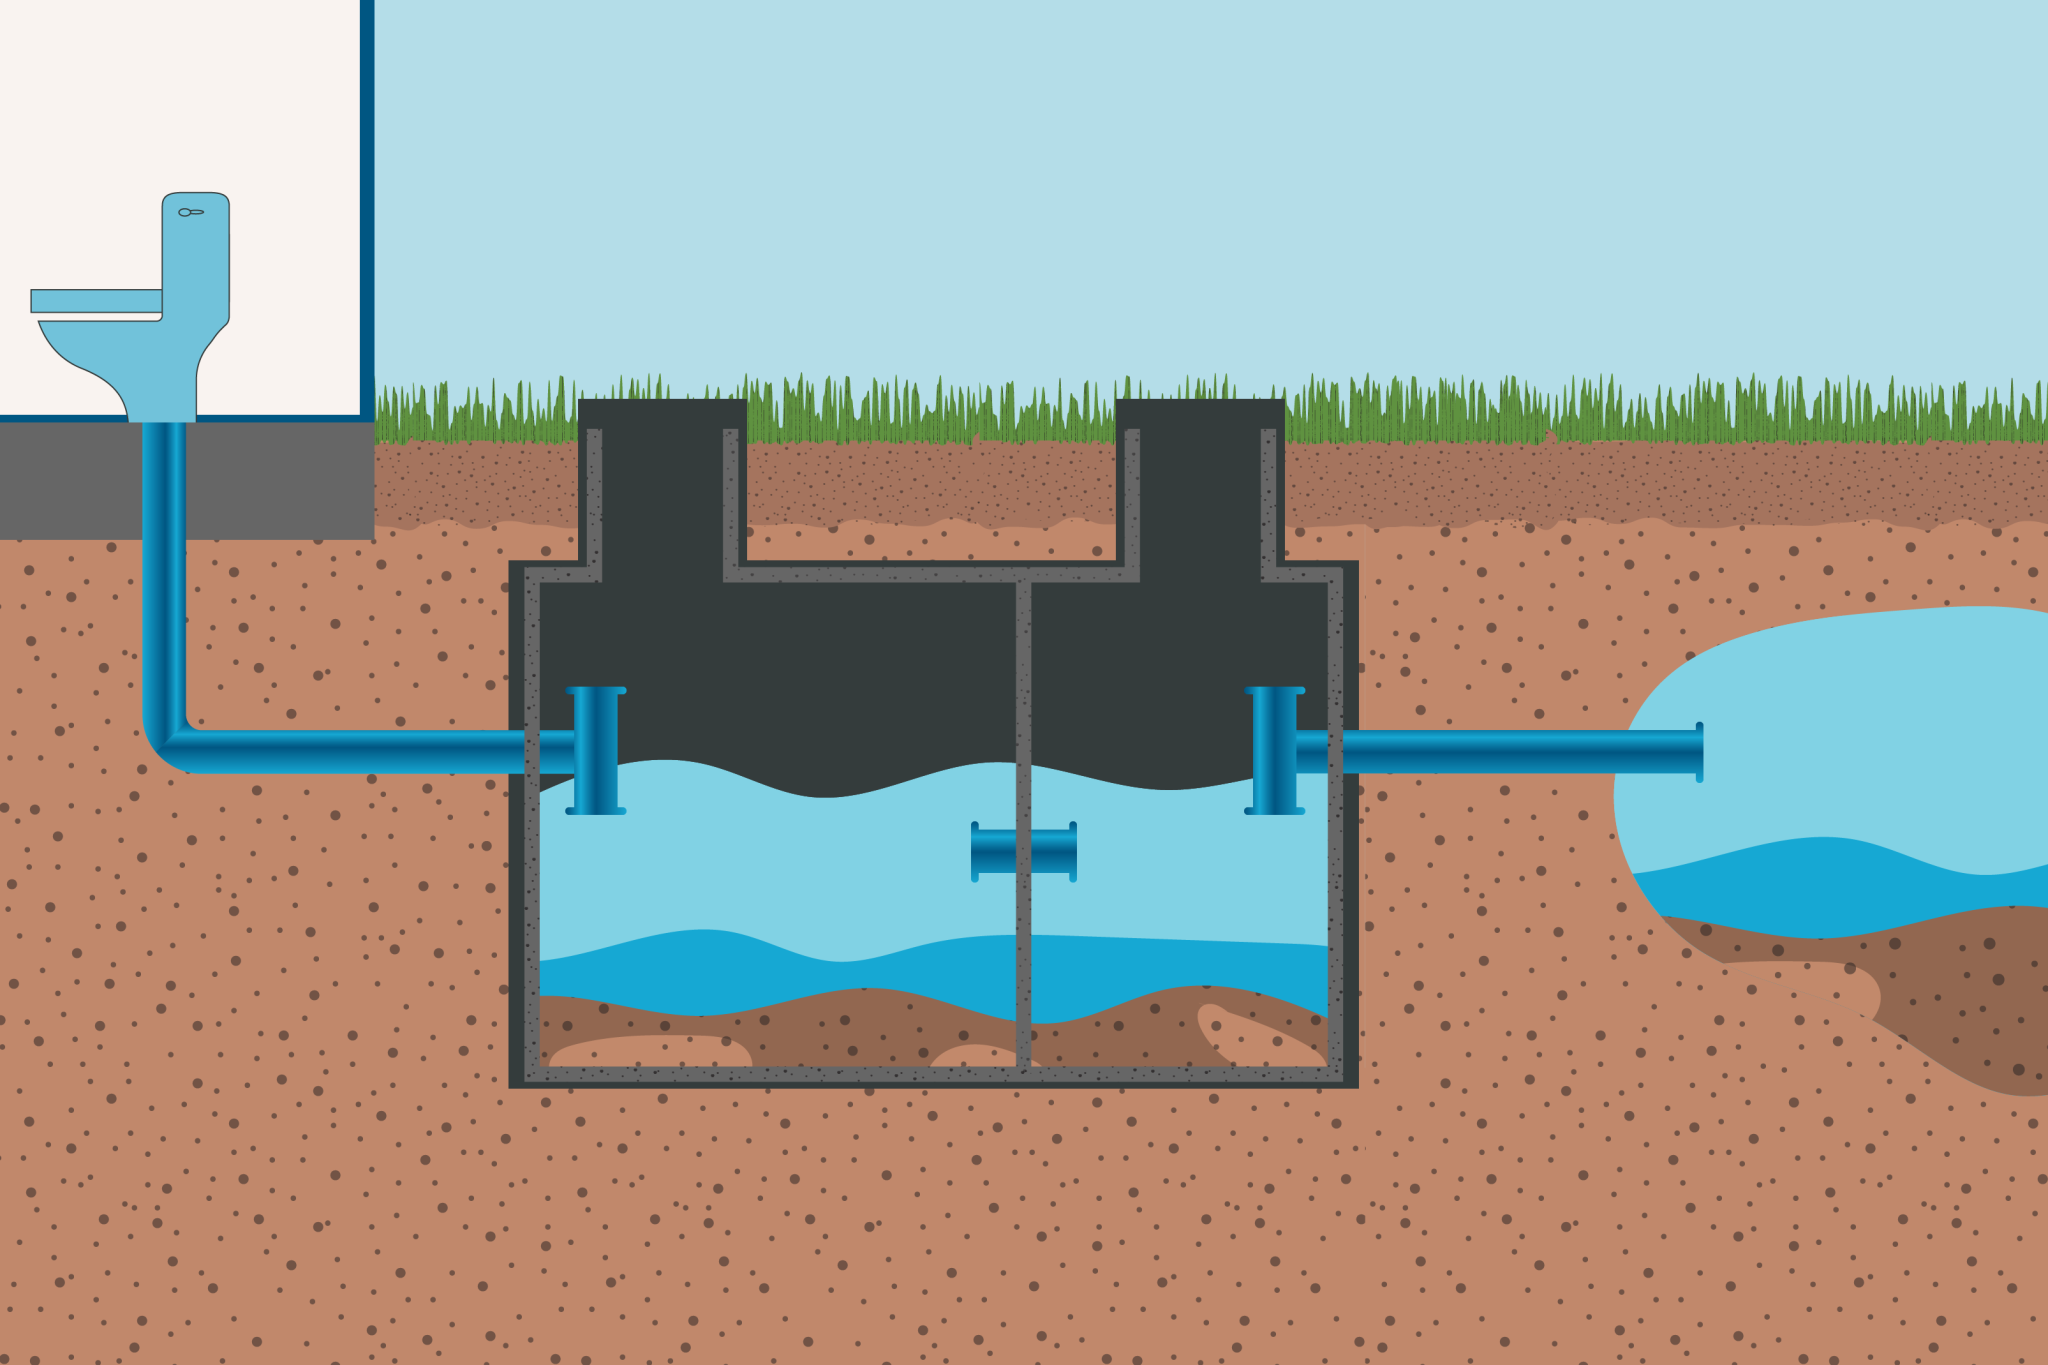 A detailed illustration showing a septic system to help increase understanding.